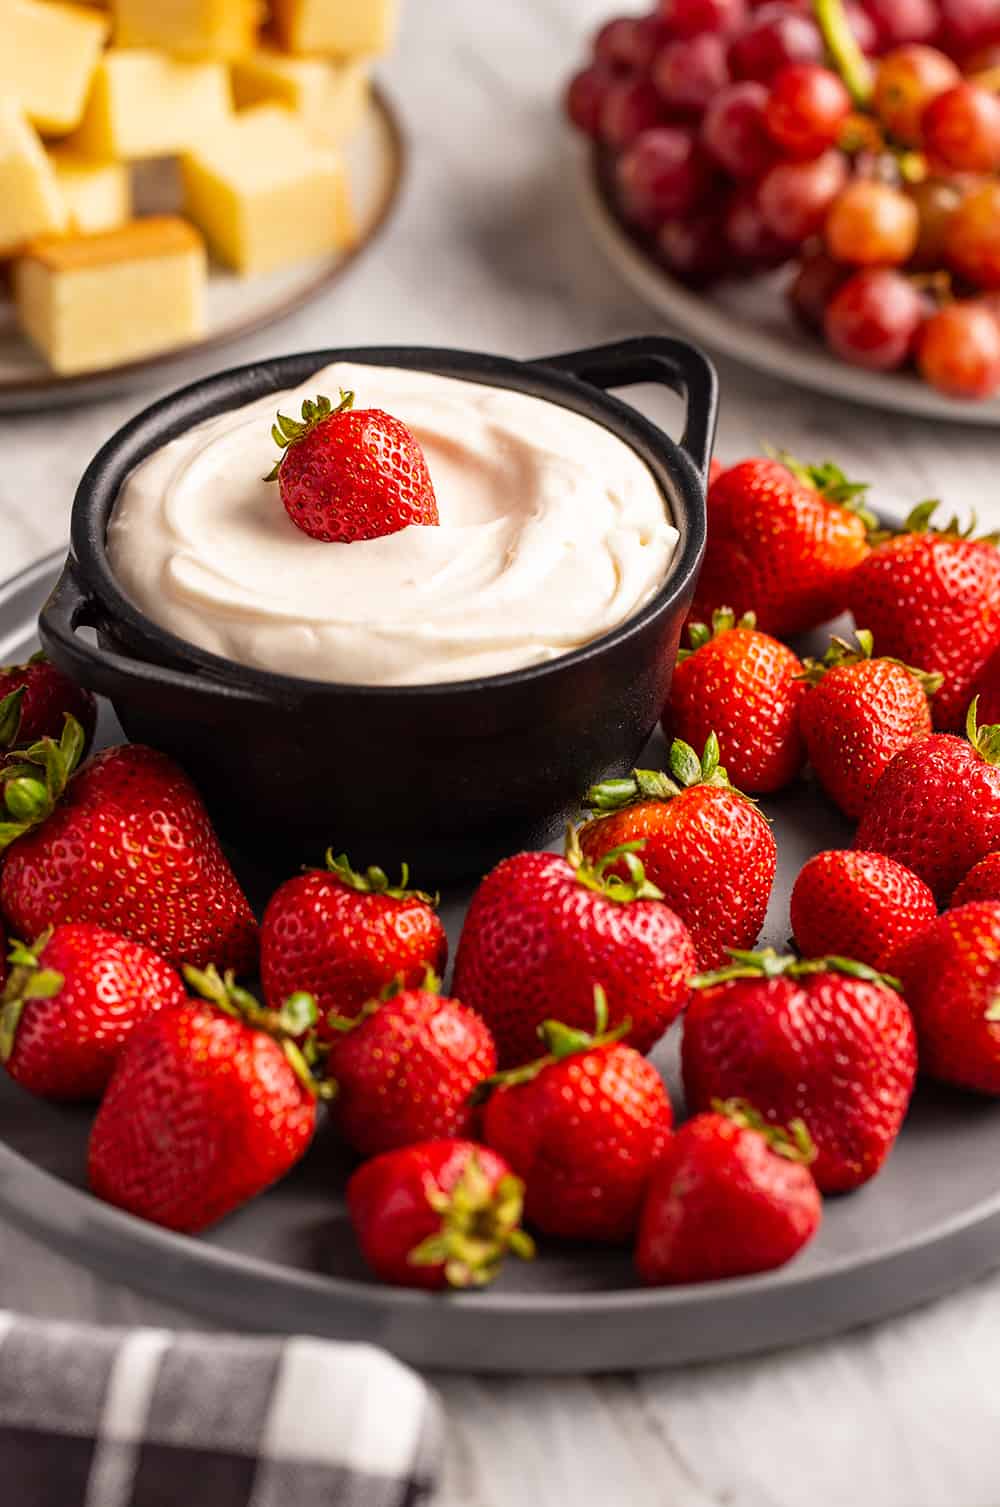 Strawberries surrounding a bowl of fruit dip on a black plate. A whole strawberry sits on top of the dip.